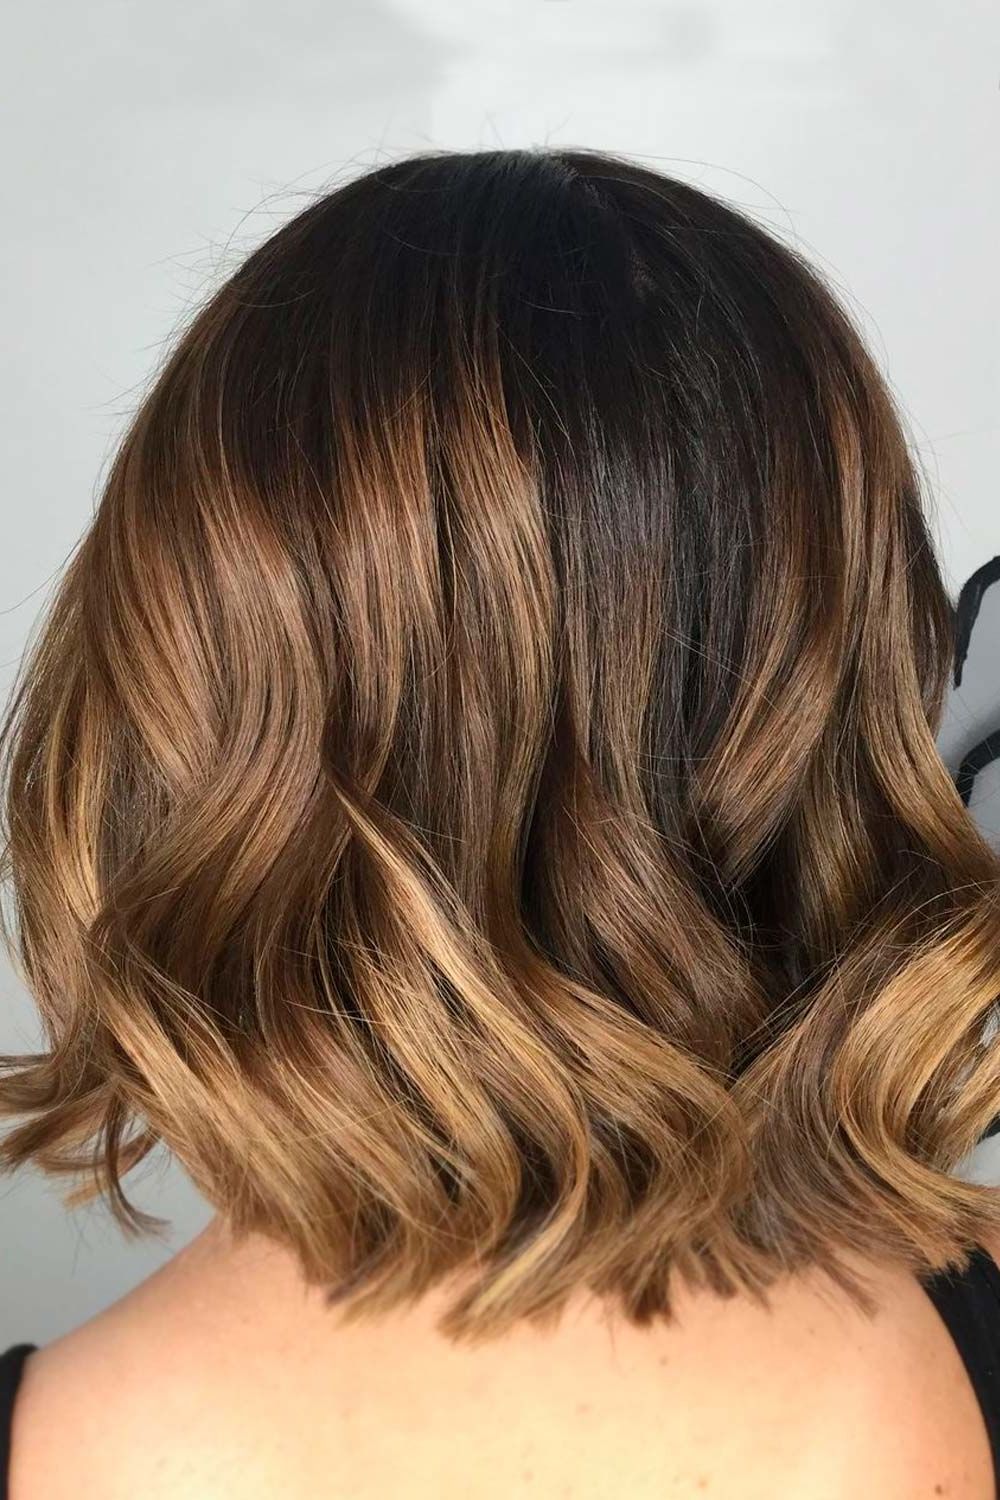 Untraditional Lob Haircut Ideas To Give A Try (View 16 of 20)